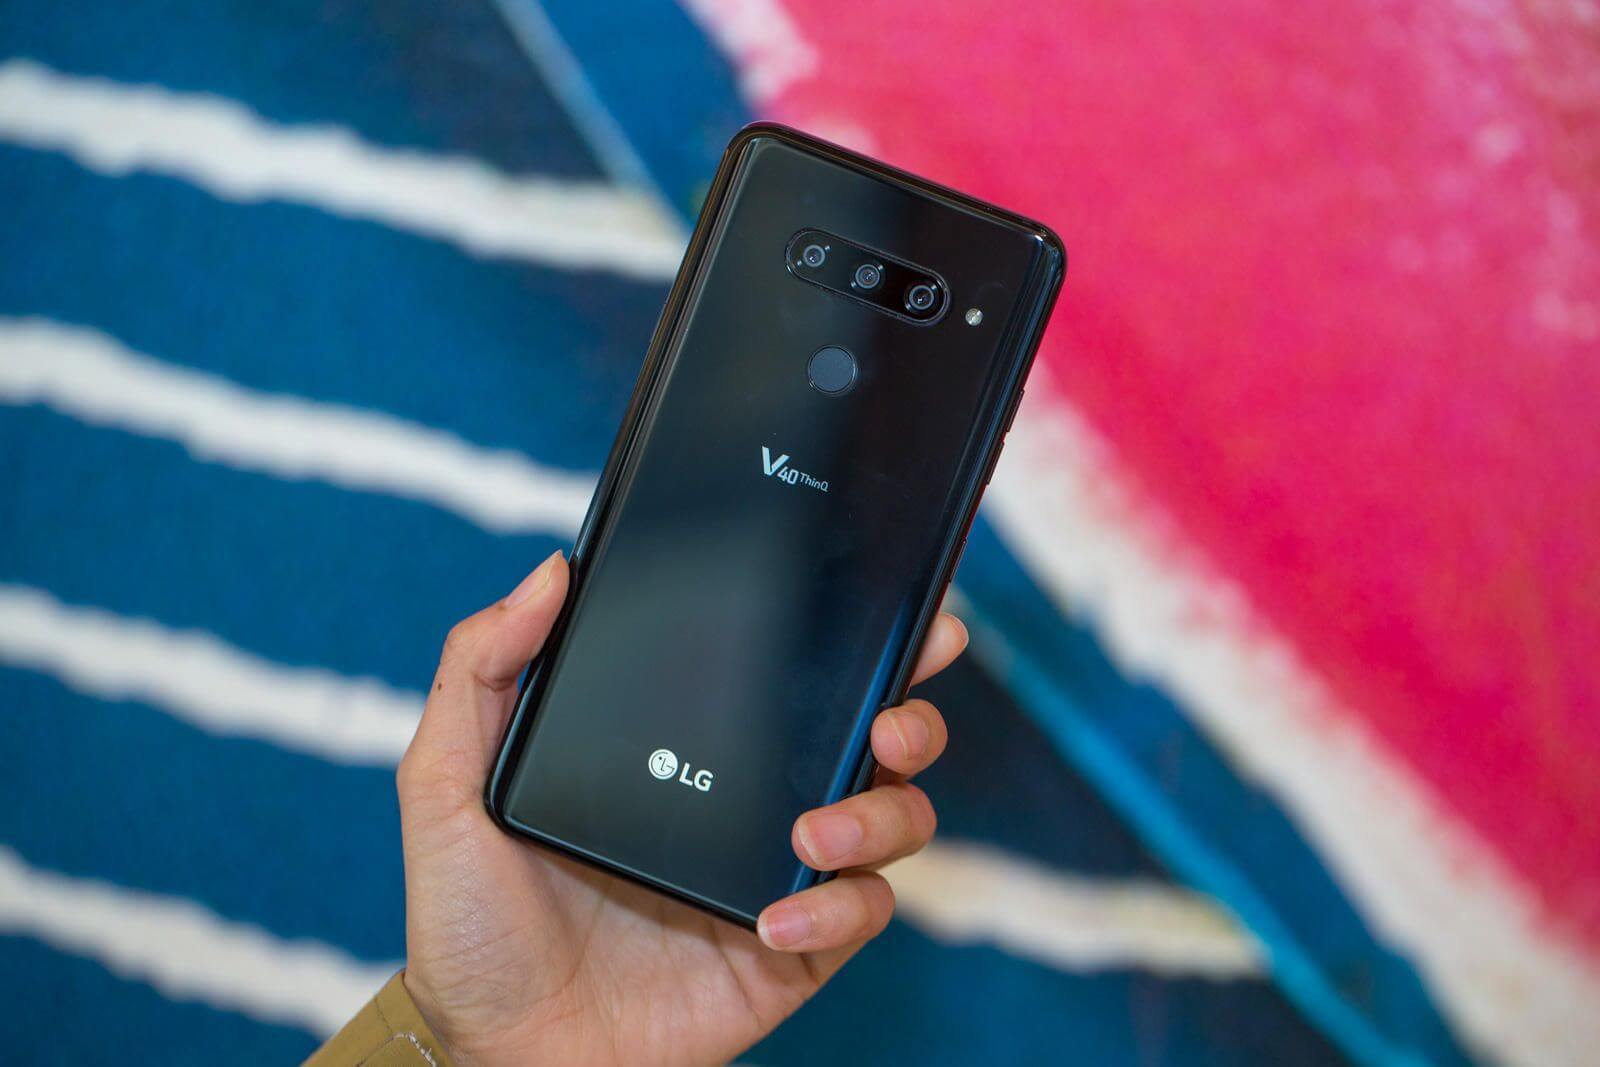 how-to-get-into-lg-phone-without-password